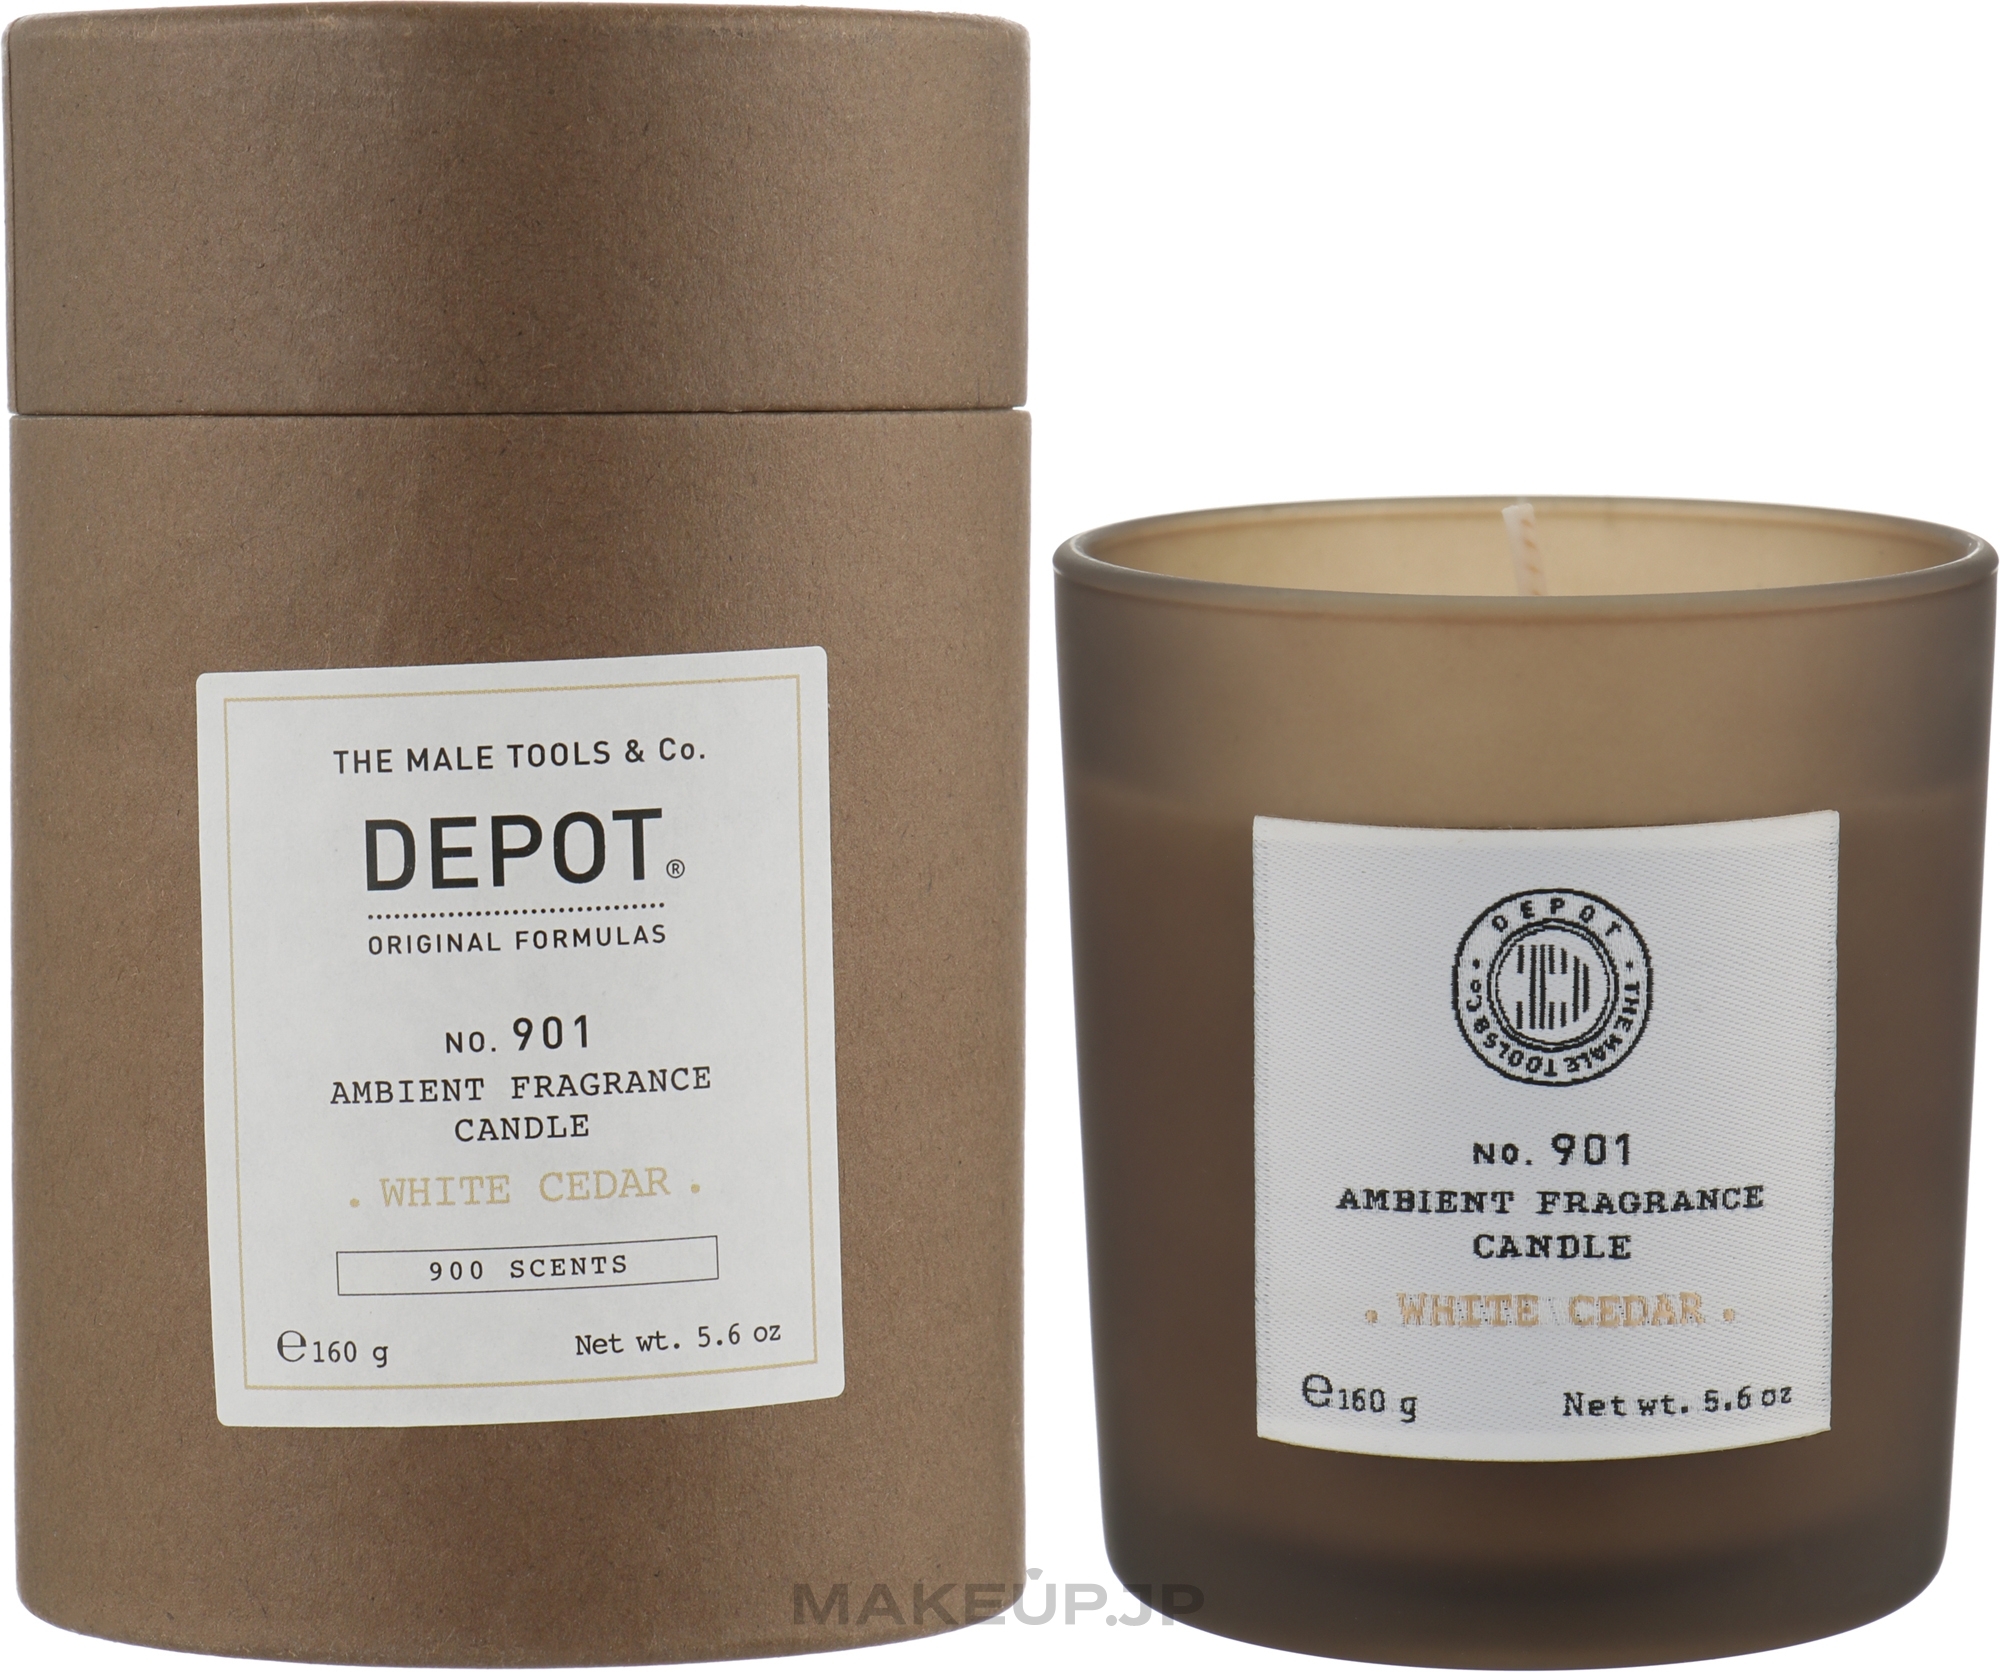 Scented Candle 'White Cedar' - Depot 901 Ambient Fragrance Candle White Cedar — photo 160 g